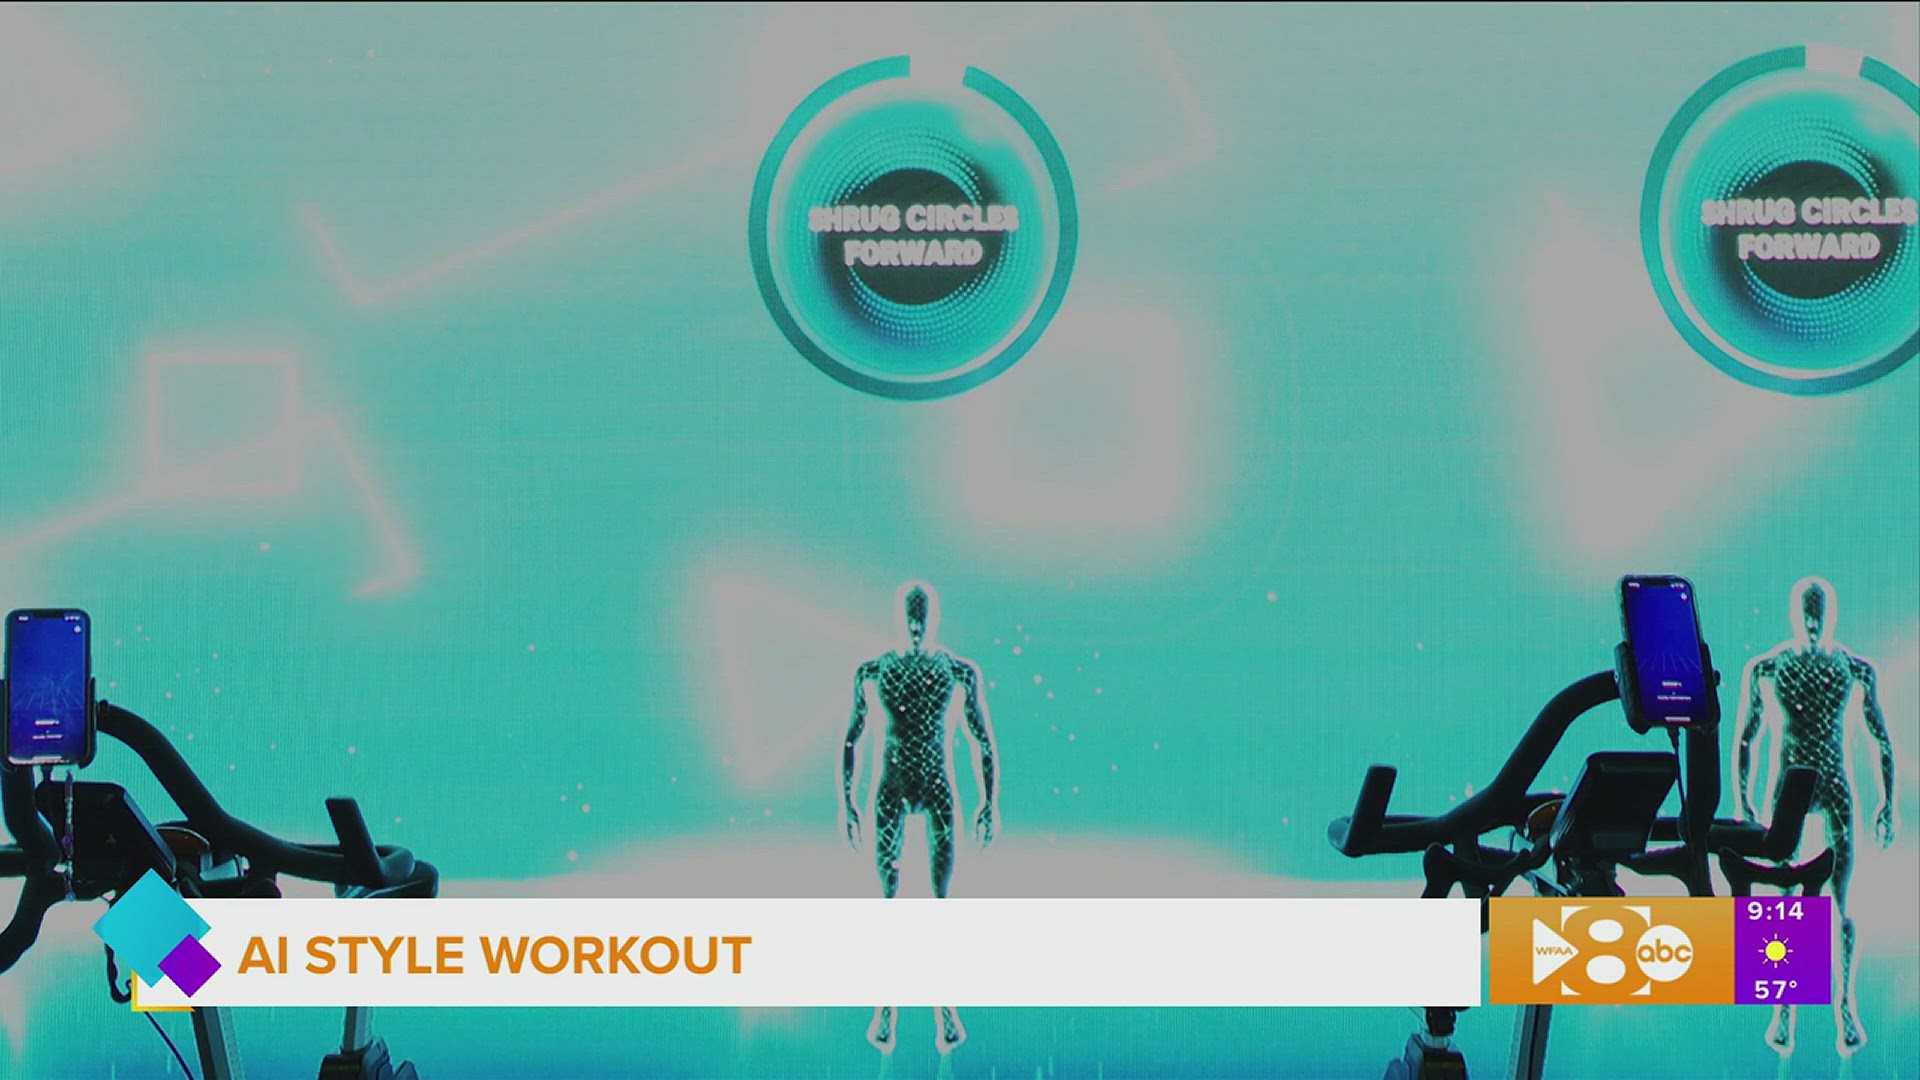 Erin checks out a new gym that uses AI to help you get fit. Go to lumin.fitness for more information.